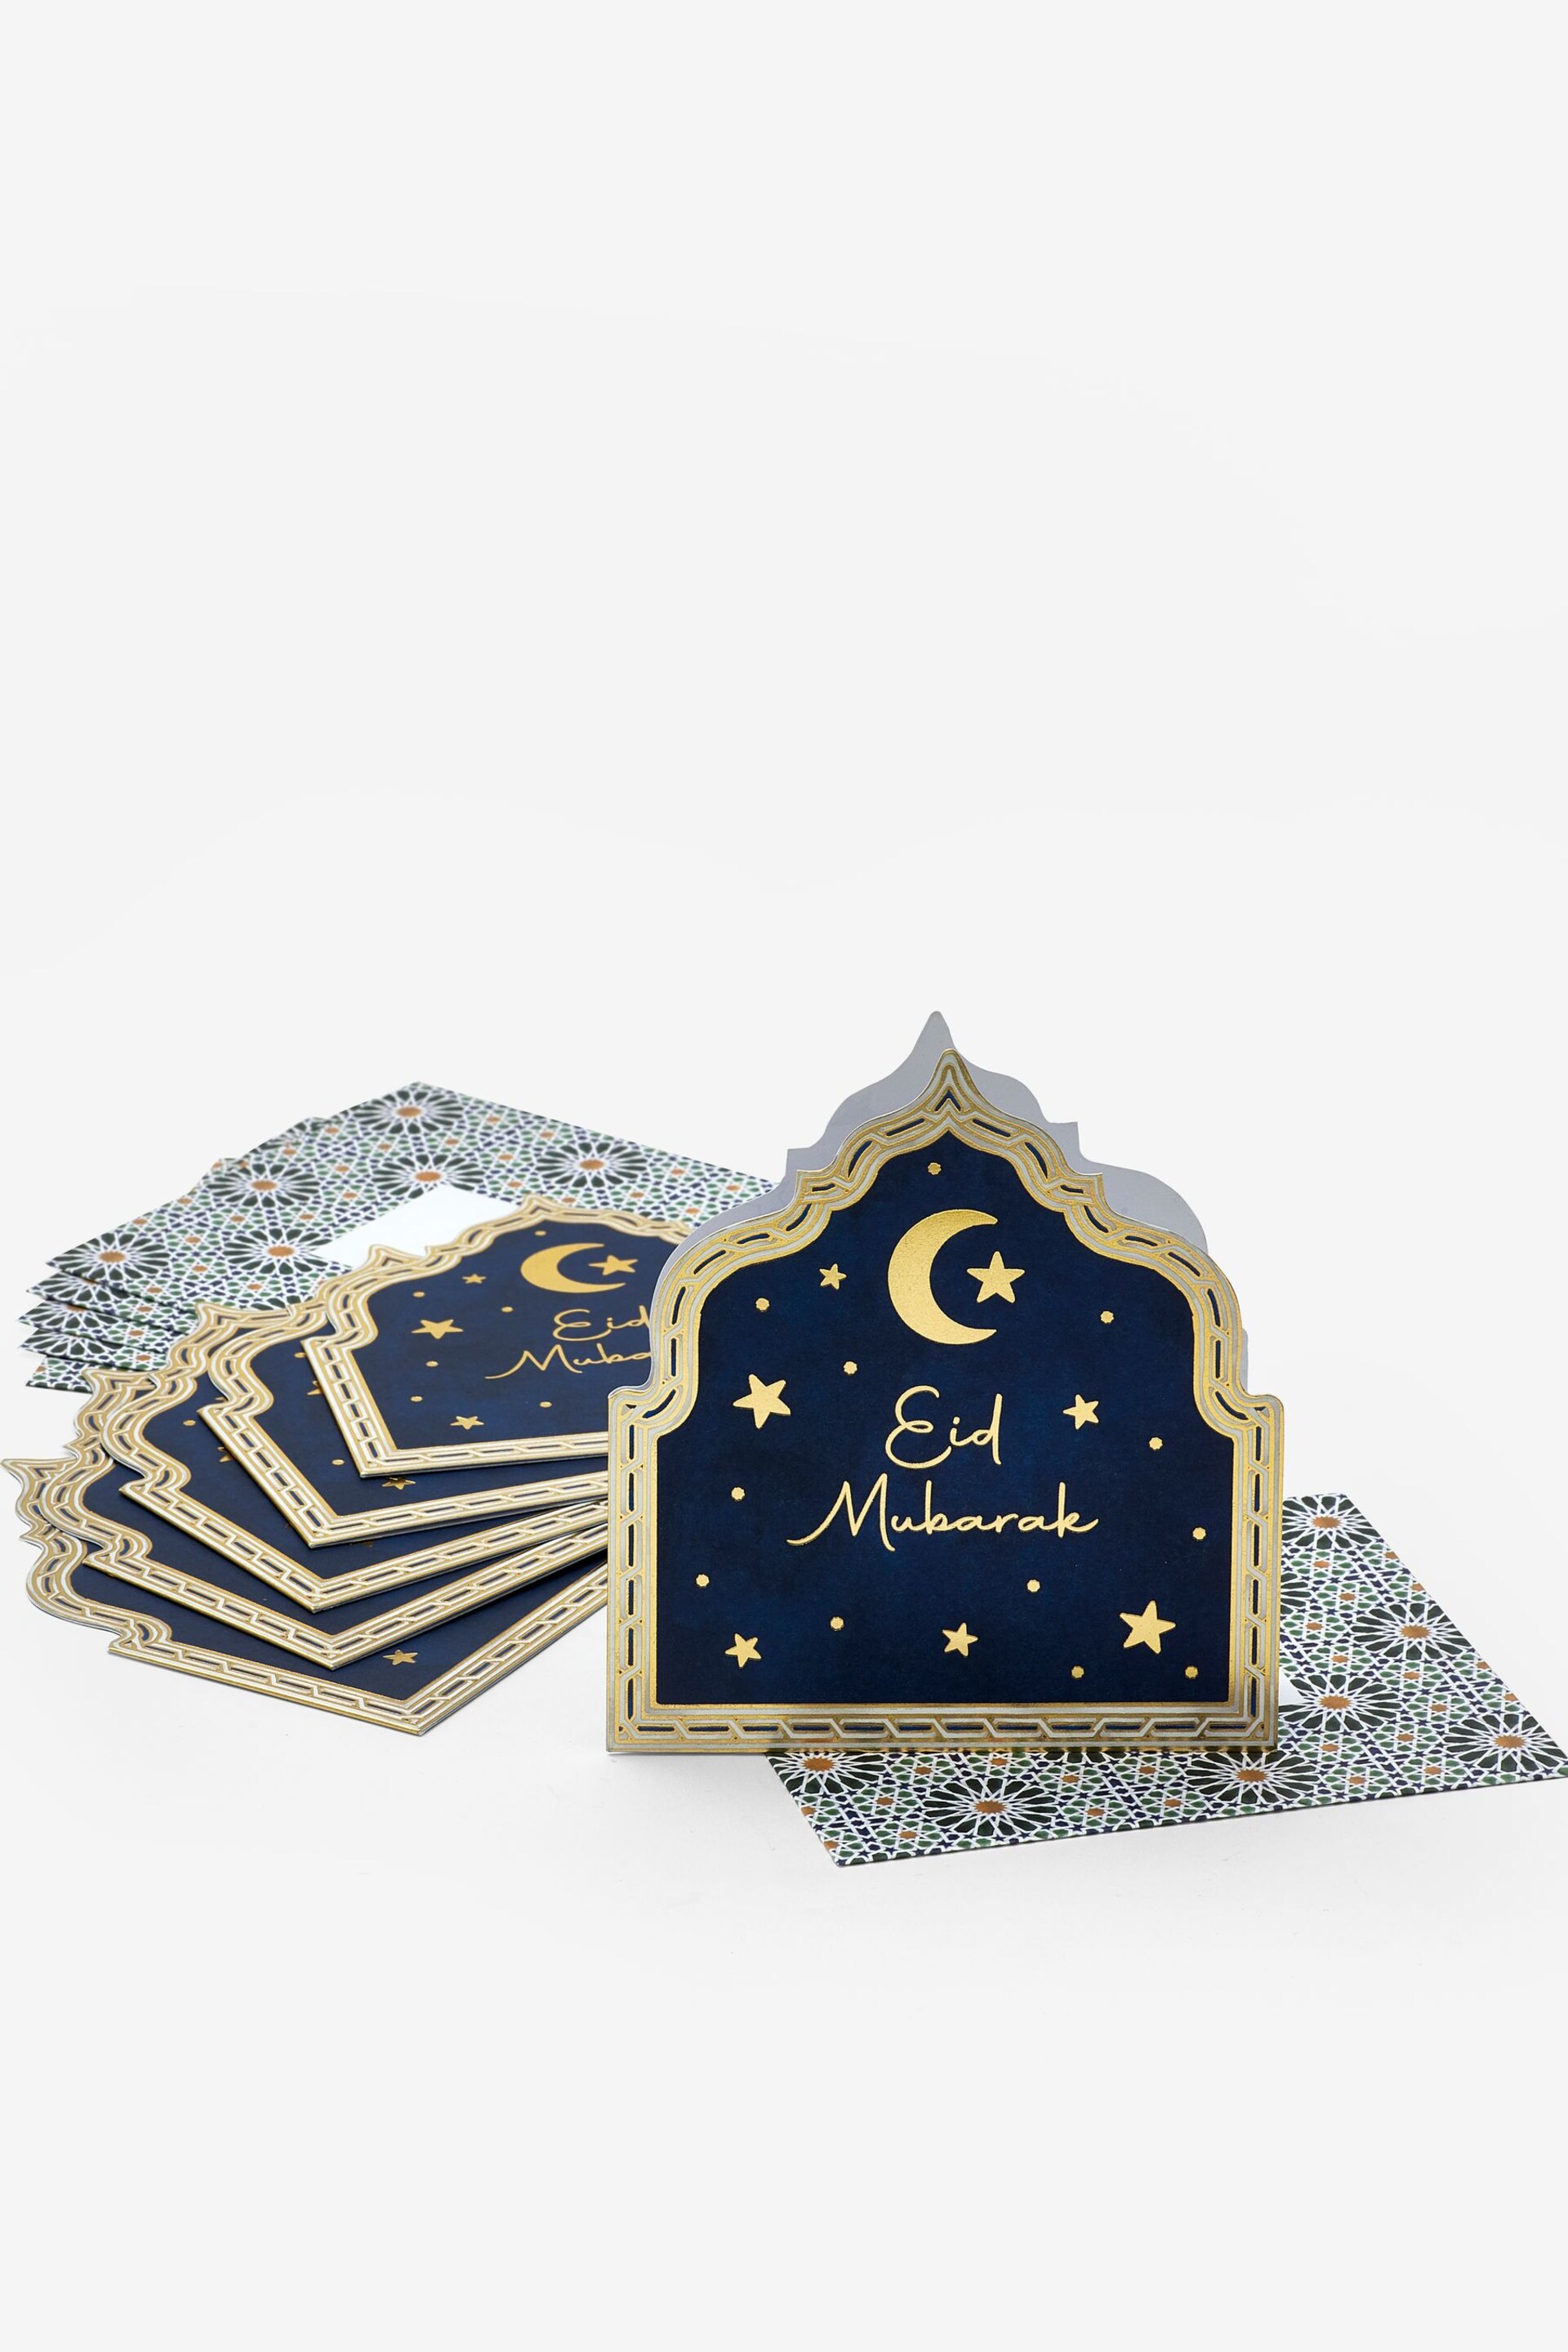 Set of 6 Navy Eid Cards - Image 4 of 4